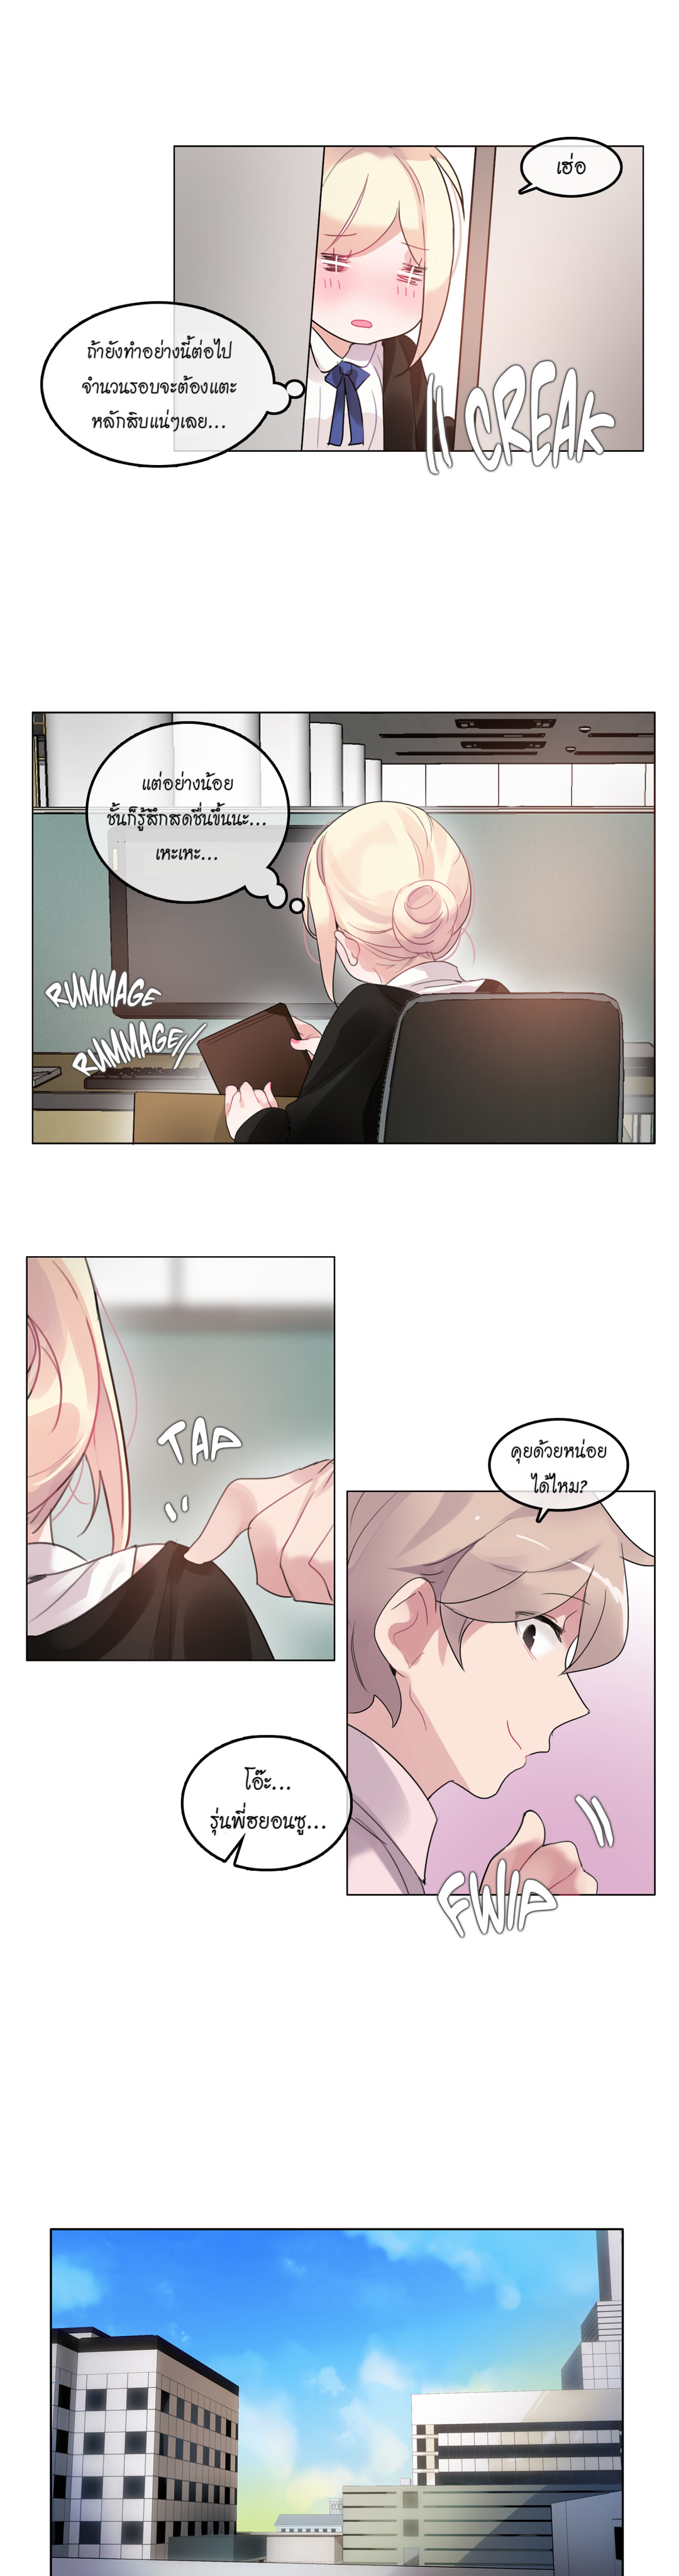 A Pervert’s Daily Life49 (13)